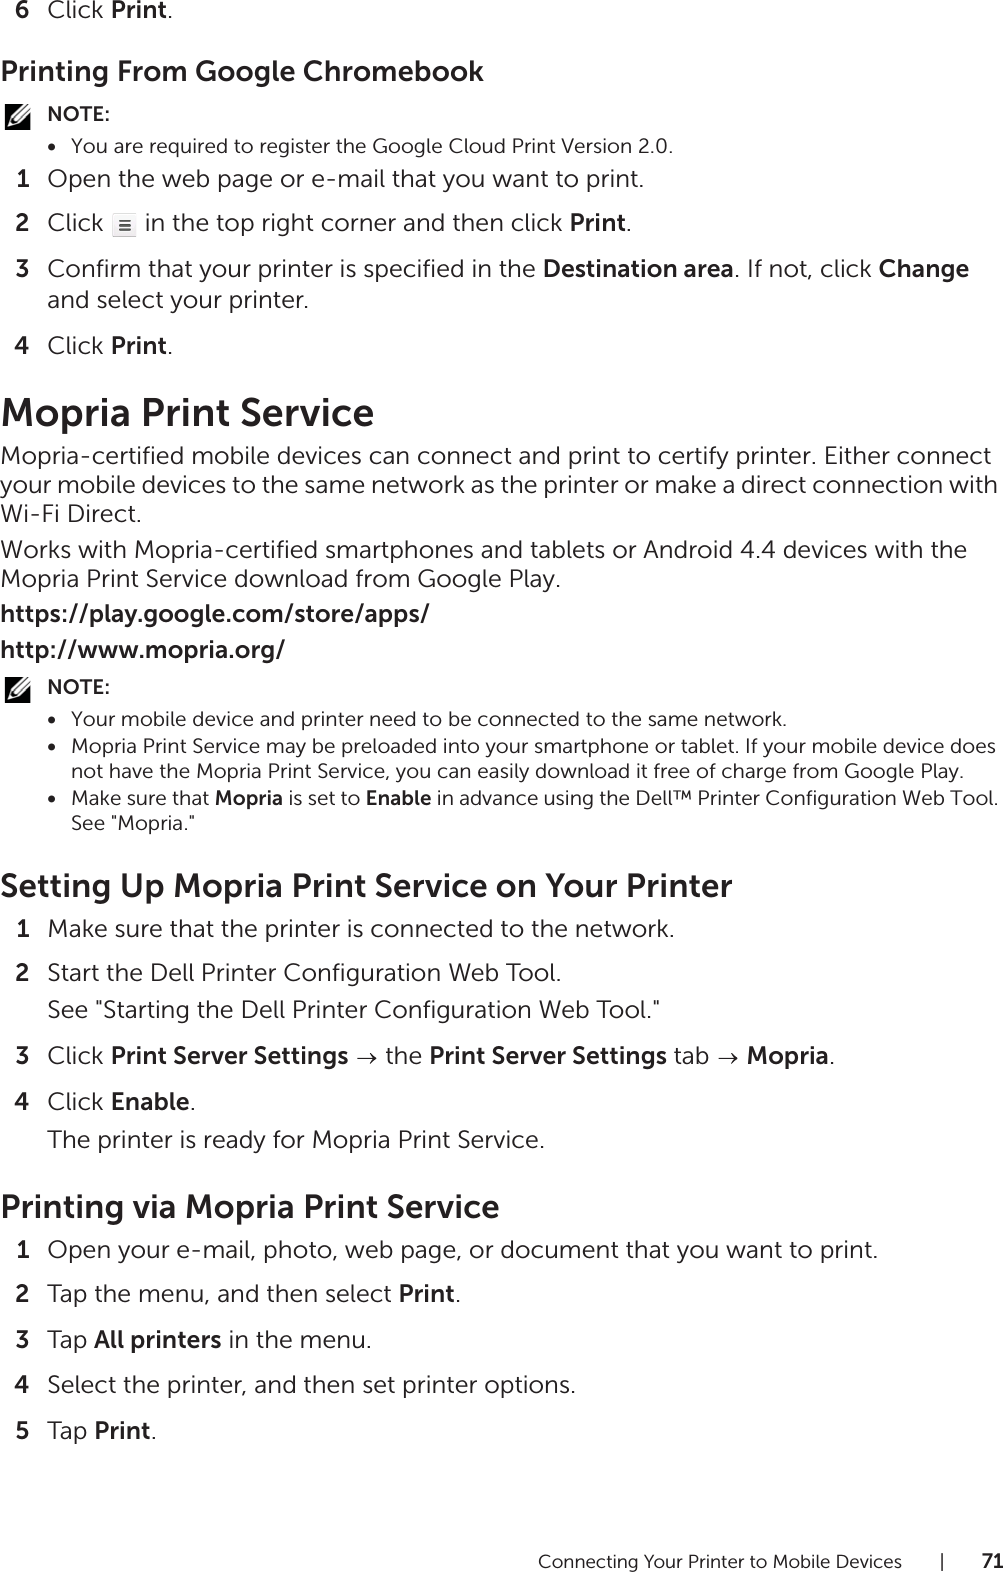 Connecting Your Printer to Mobile Devices |716Click Print.Printing From Google ChromebookNOTE:•You are required to register the Google Cloud Print Version 2.0.1Open the web page or e-mail that you want to print.2Click   in the top right corner and then click Print.3Confirm that your printer is specified in the Destination area. If not, click Change and select your printer.4Click Print.Mopria Print ServiceMopria-certified mobile devices can connect and print to certify printer. Either connect your mobile devices to the same network as the printer or make a direct connection with Wi-Fi Direct.Works with Mopria-certified smartphones and tablets or Android 4.4 devices with the Mopria Print Service download from Google Play.https://play.google.com/store/apps/http://www.mopria.org/NOTE:•Your mobile device and printer need to be connected to the same network.•Mopria Print Service may be preloaded into your smartphone or tablet. If your mobile device does not have the Mopria Print Service, you can easily download it free of charge from Google Play.•Make sure that Mopria is set to Enable in advance using the Dell™ Printer Configuration Web Tool. See &quot;Mopria.&quot;Setting Up Mopria Print Service on Your Printer1Make sure that the printer is connected to the network.2Start the Dell Printer Configuration Web Tool.See &quot;Starting the Dell Printer Configuration Web Tool.&quot;3Click Print Server Settings  the Print Server Settings tab   Mopria.4Click Enable.The printer is ready for Mopria Print Service.Printing via Mopria Print Service1Open your e-mail, photo, web page, or document that you want to print.2Tap the menu, and then select Print.3Tap All printers in the menu.4Select the printer, and then set printer options.5Tap Print.